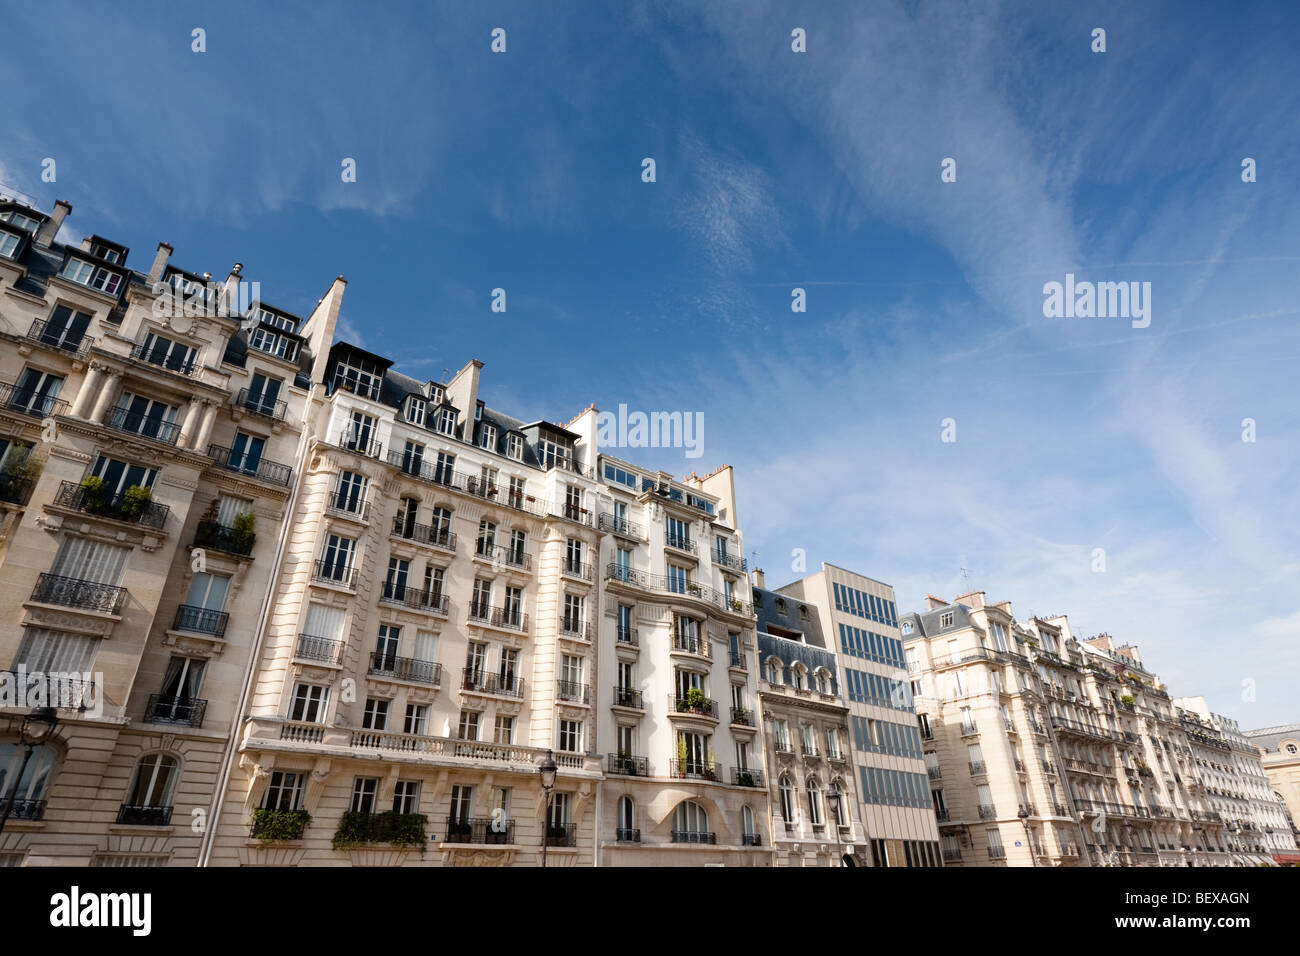 Paris, France residential houses with blue sky and sparse clouds. Stock Photo